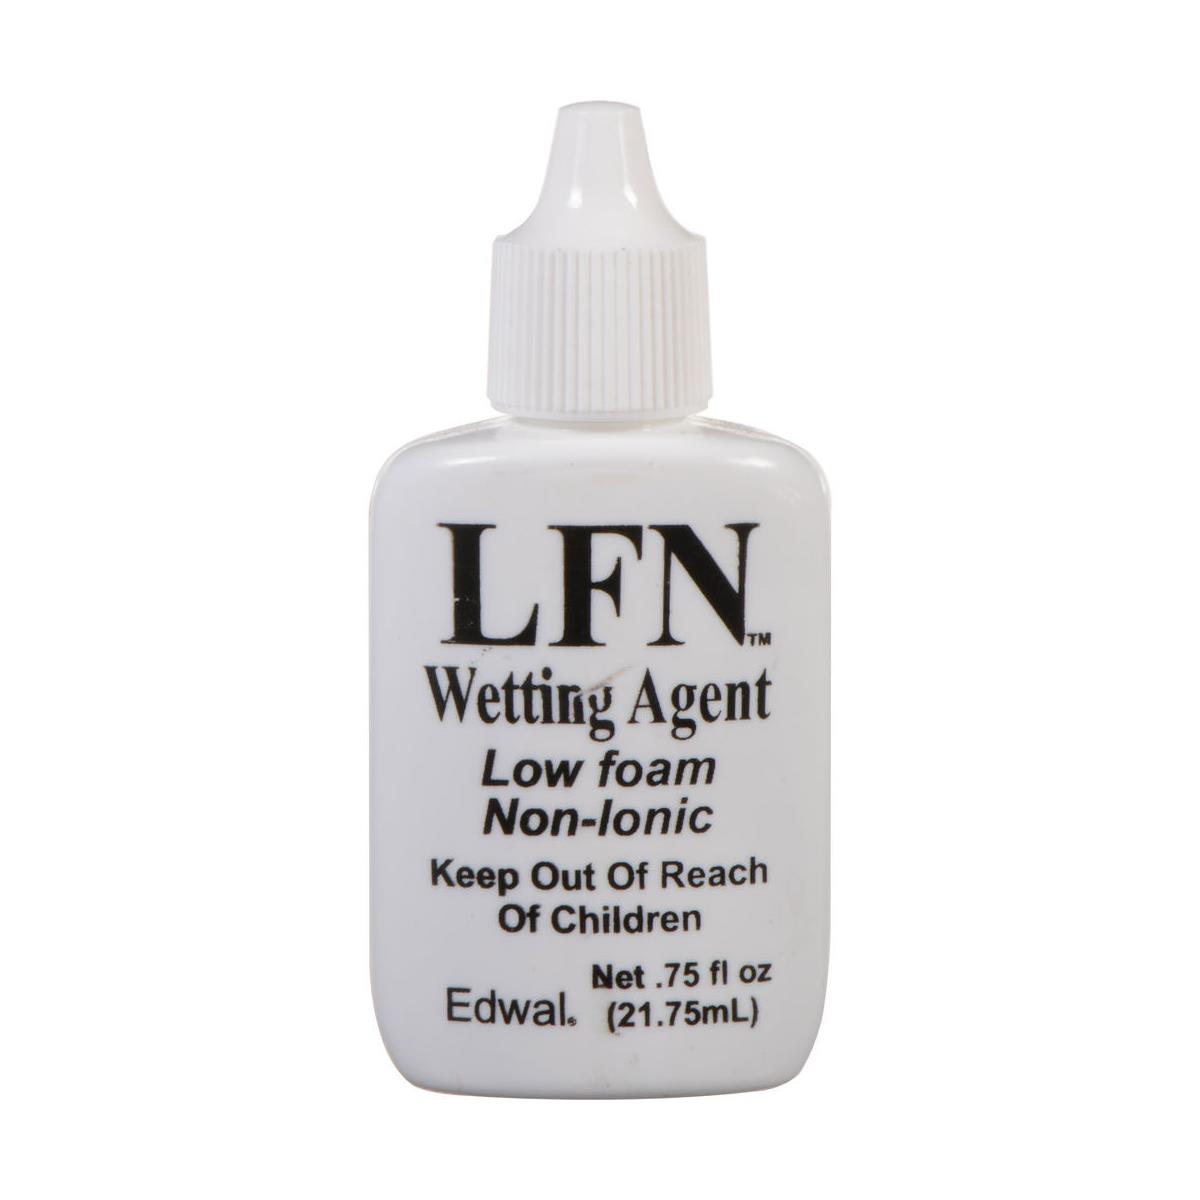 Image of Edwal LFN Low Foam Wetting Agent